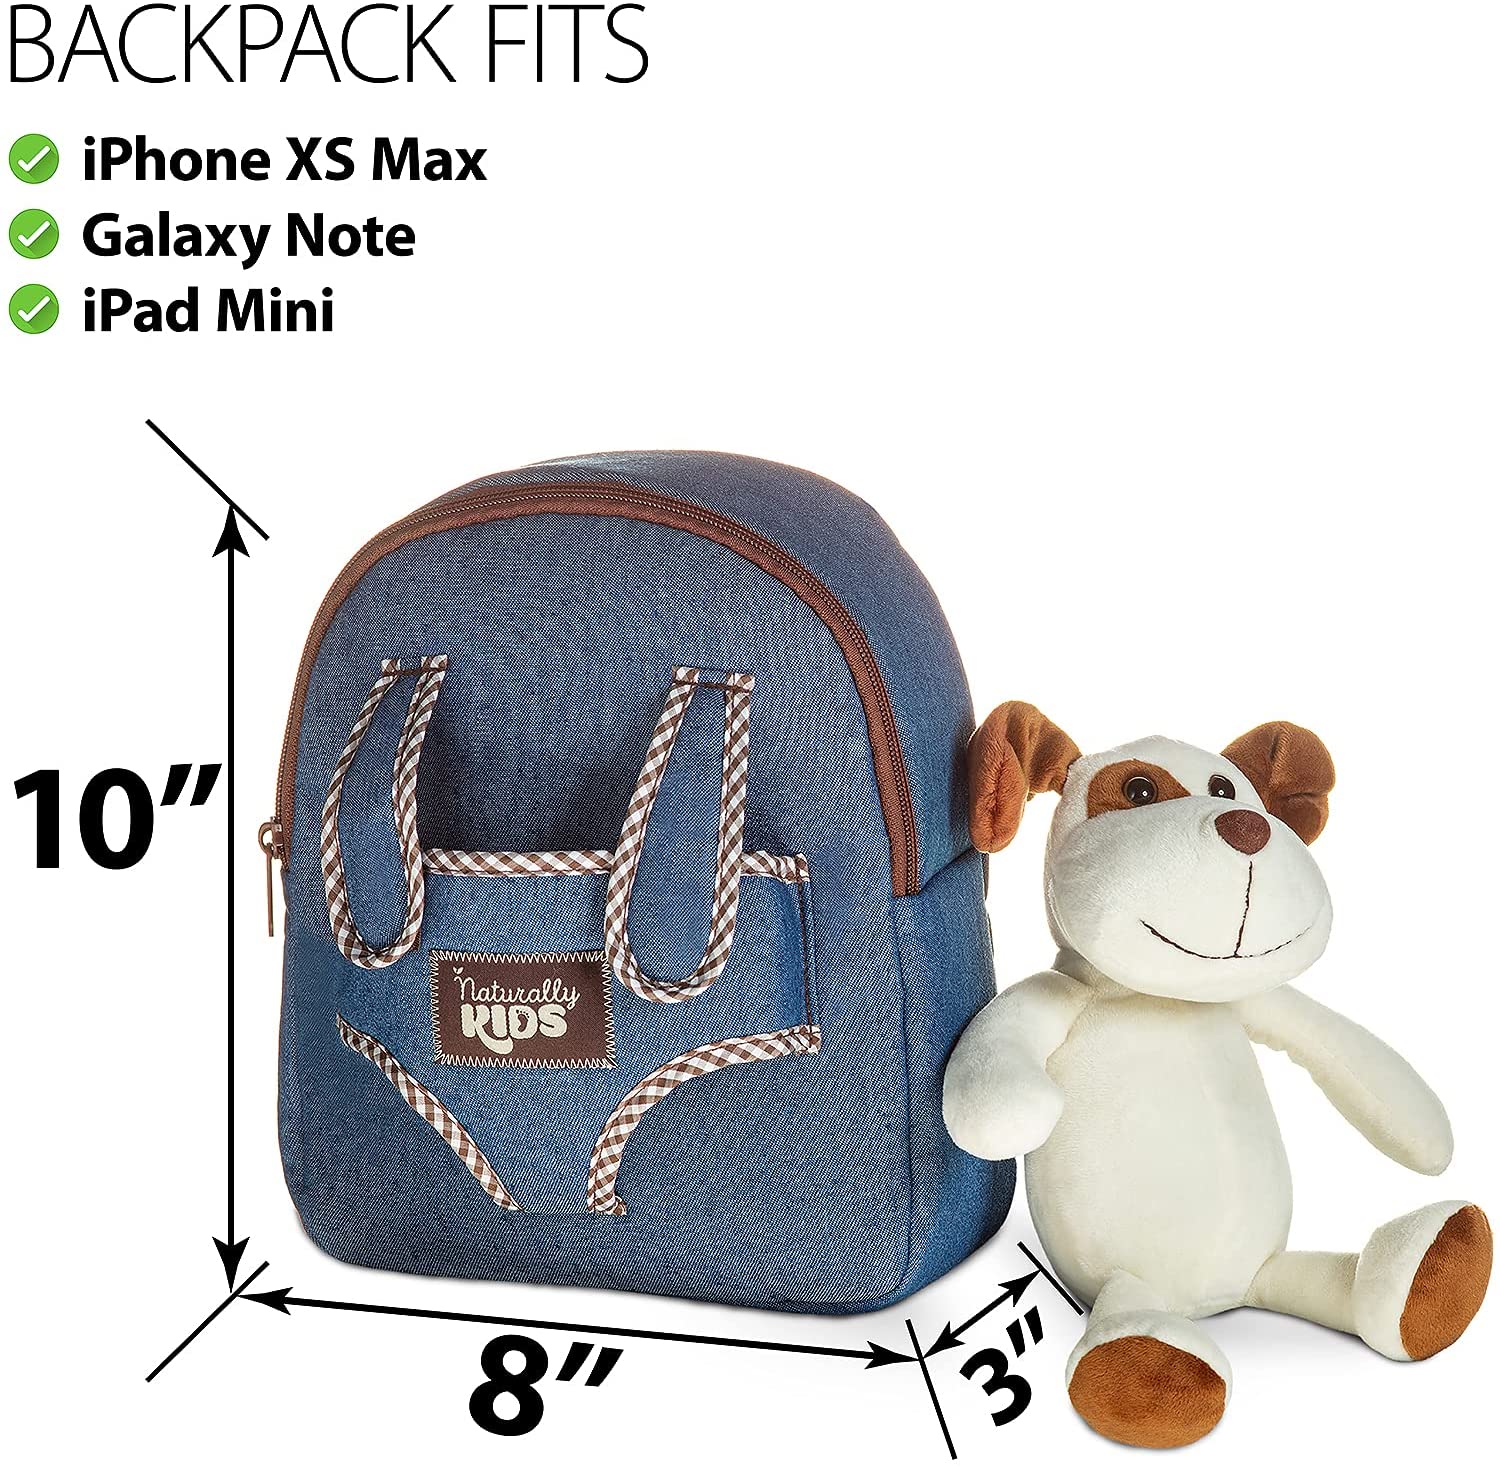 Naturally KIDS Small Backpack w Stuffed Animal Dog Plush Toy - Toddler Backpack for Boy Backpack for Kids - Toys for Kids Ages 3 4 5 6 7 Toys for 3 Year Old Boys Puppy Backpack - 4 Year Old Girl Gift - image 4 of 9